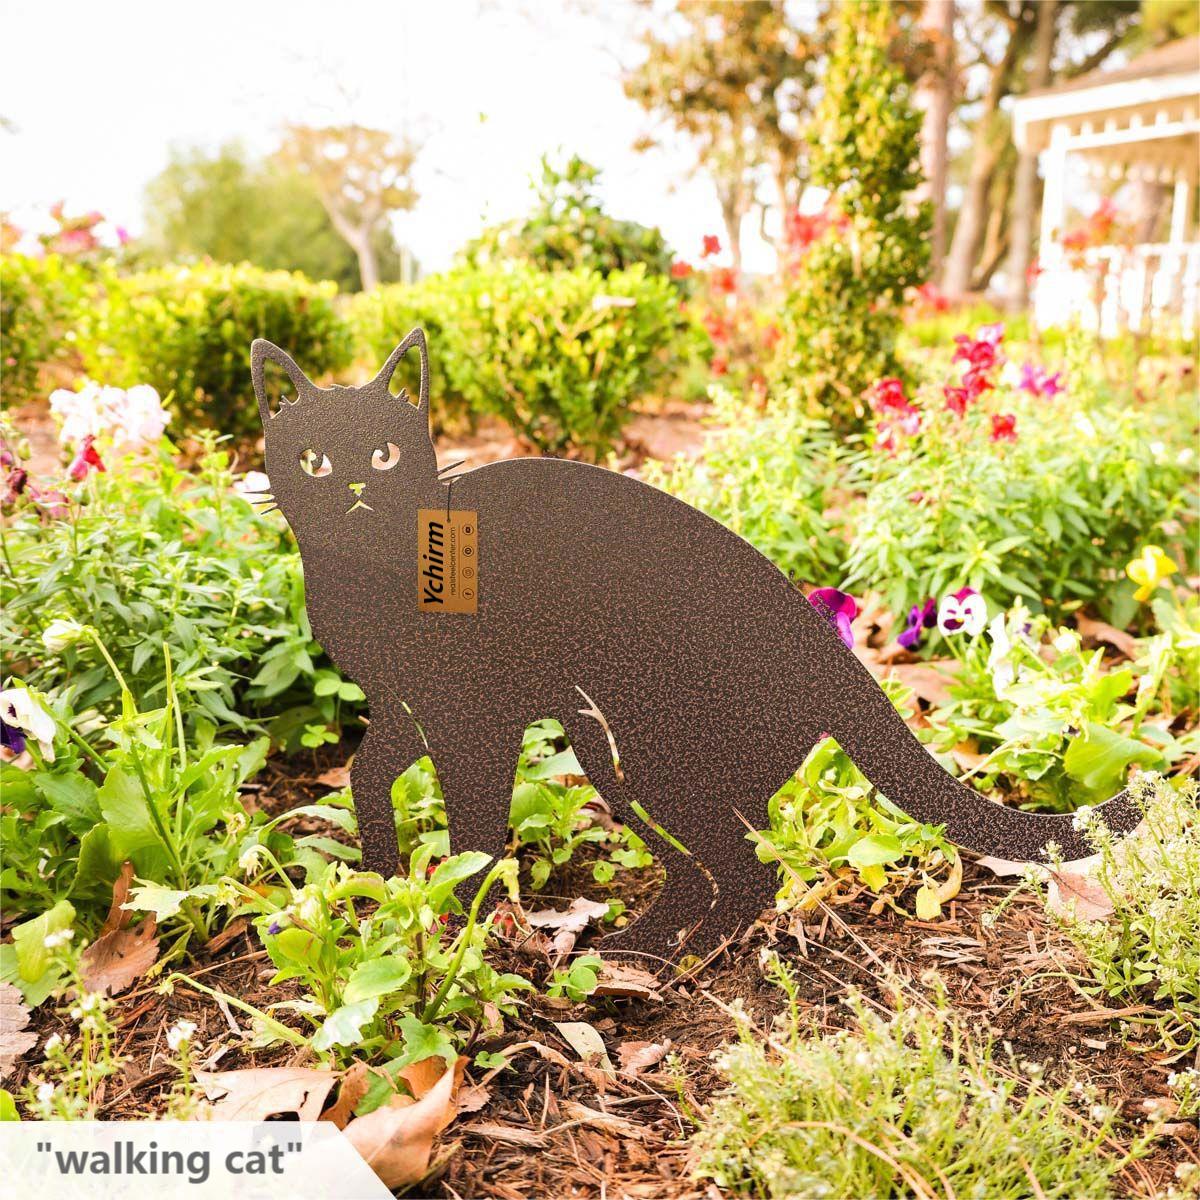 (🔥Last Day Promotion-SAVE 50% OFF) Adorable Metal Cats Decor [3 PACK]-Garden Art - Buy 2 Set Free Shipping